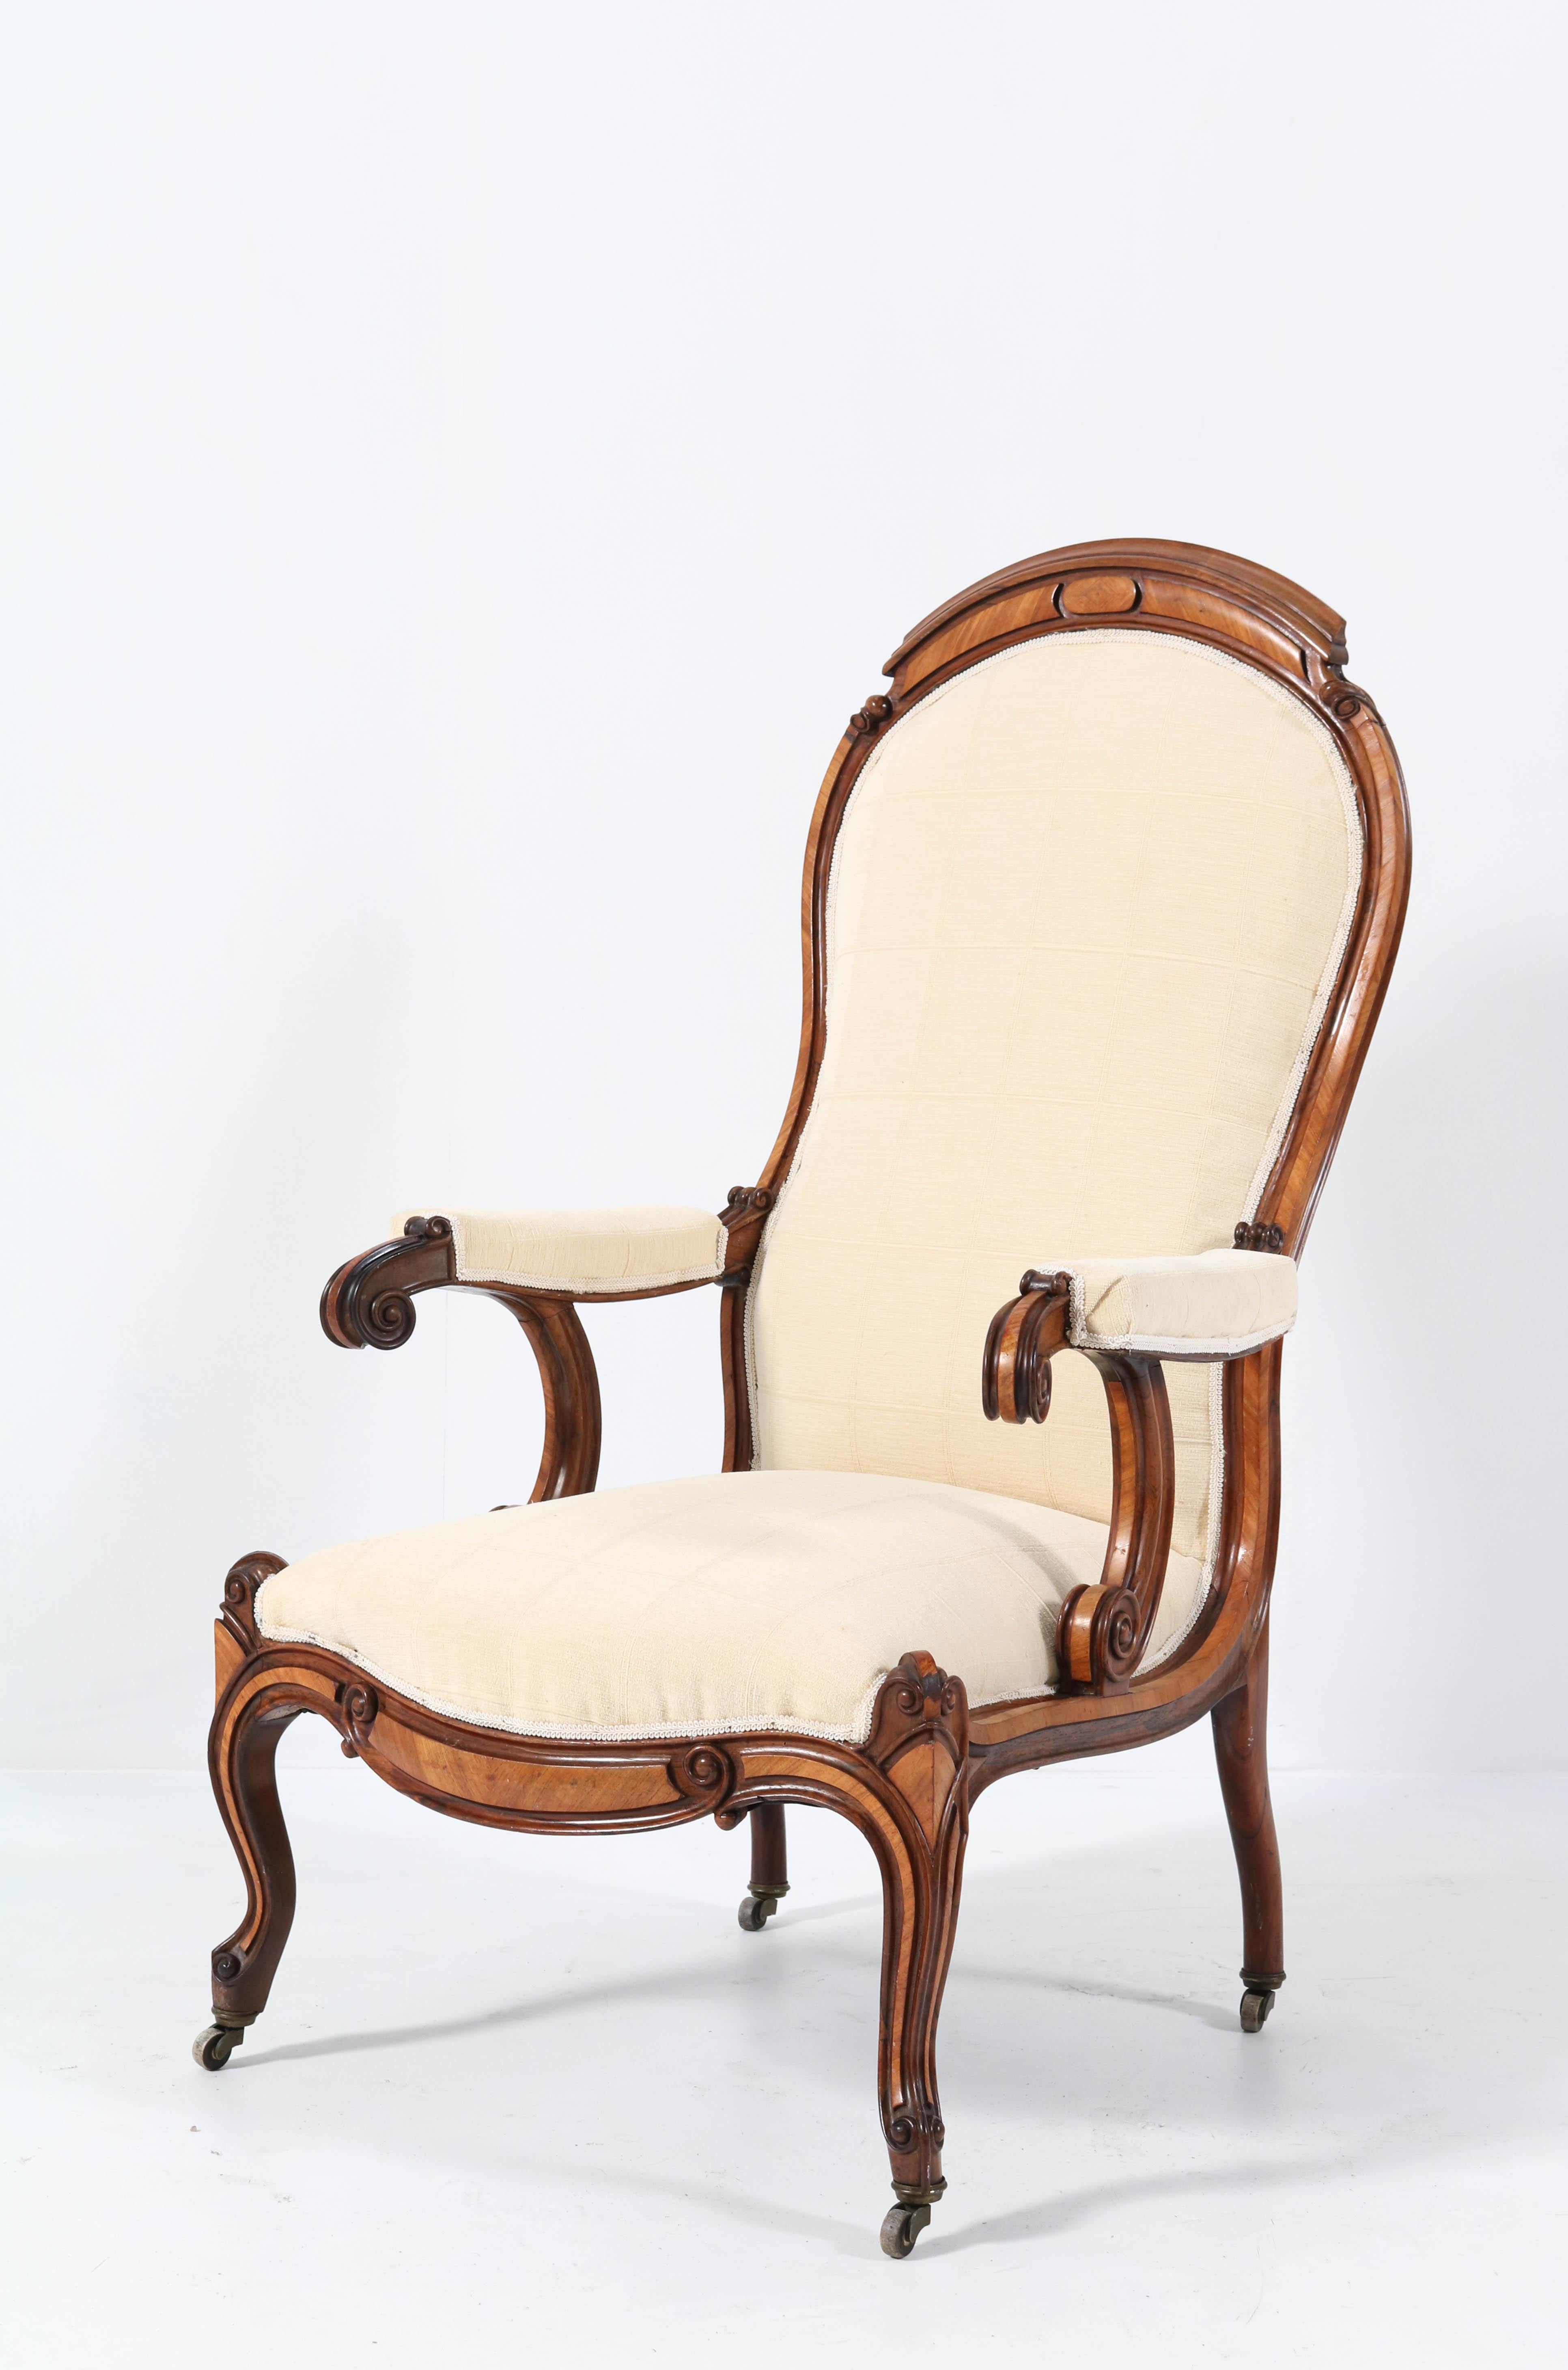 Mid-19th Century Satinwood Victorian High Back Armchair or Voltaire Chair, 1860s For Sale